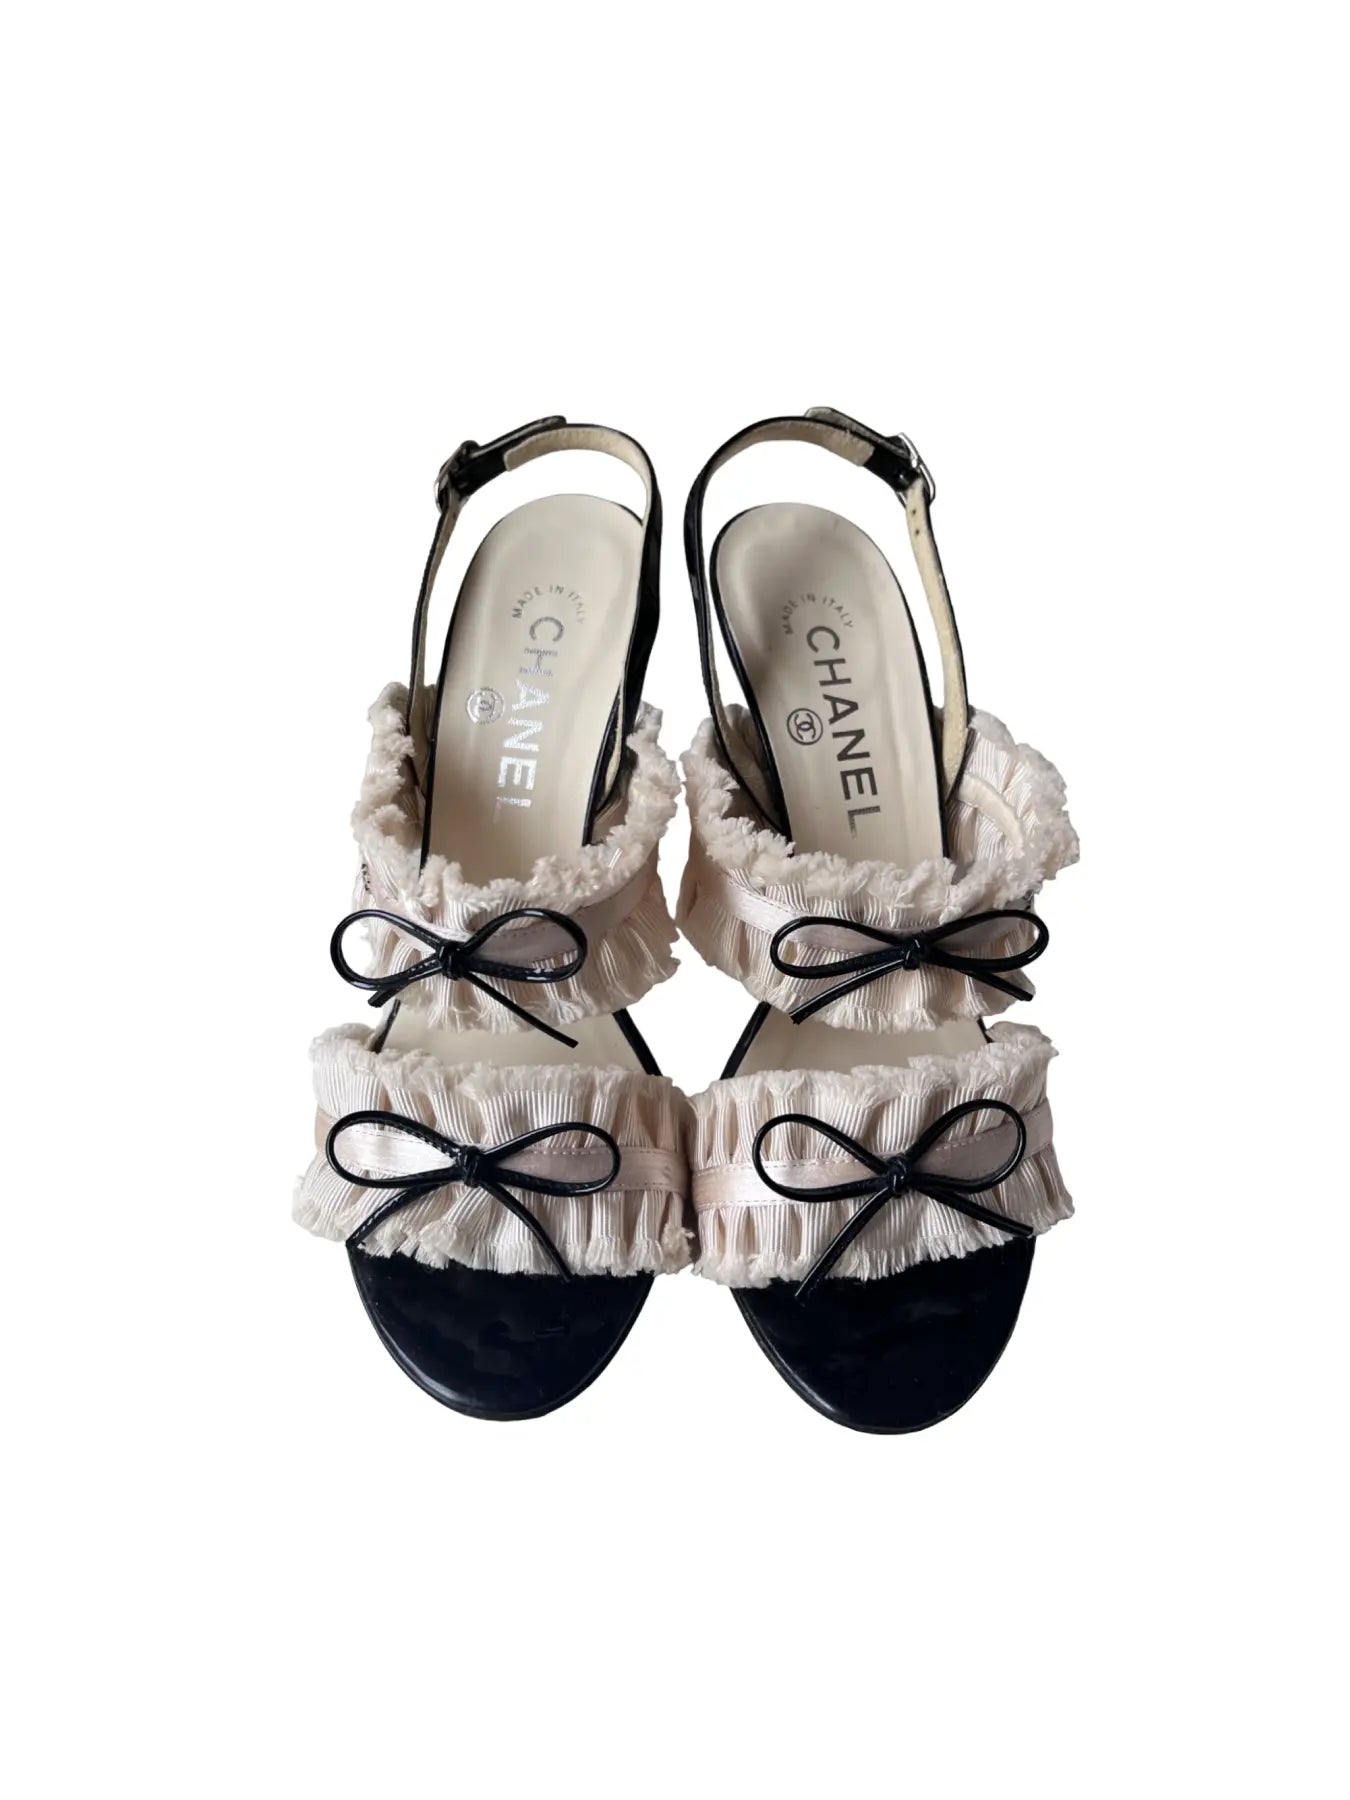 CHANEL, Shoes, Chanel Bow Sandals